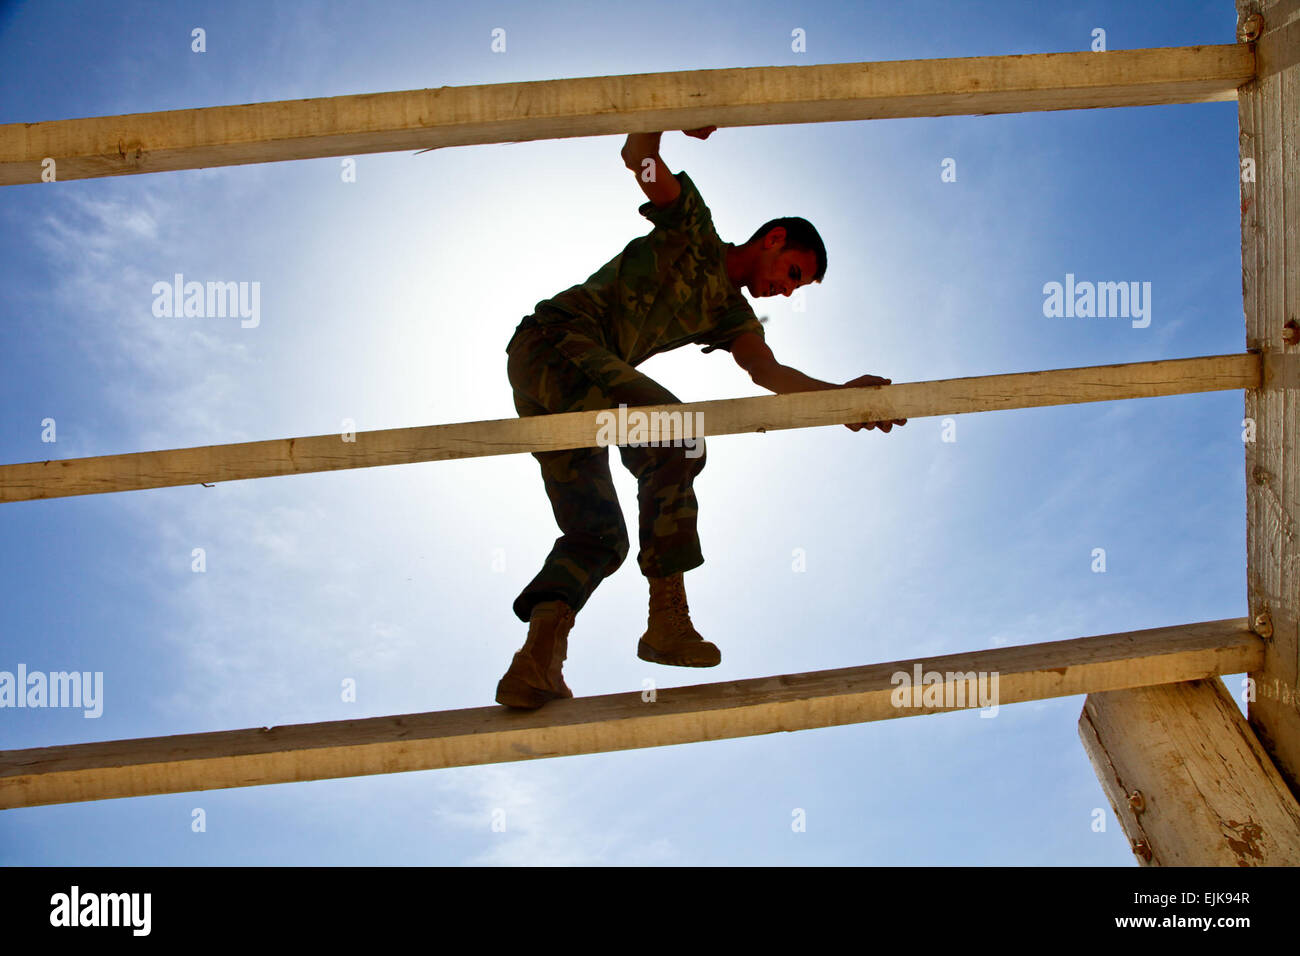 An Iraqi border enforcement officer, Candidate 2nd Lt. Mustafa Khayon, climbs down an obstacle at a course at the Shaibah Training Center near Contingency Operating Base, Basra, Iraq, March 15, 2010. U.S. Soldiers also participated in the course.  Staff Sgt. Adelita Mead Stock Photo